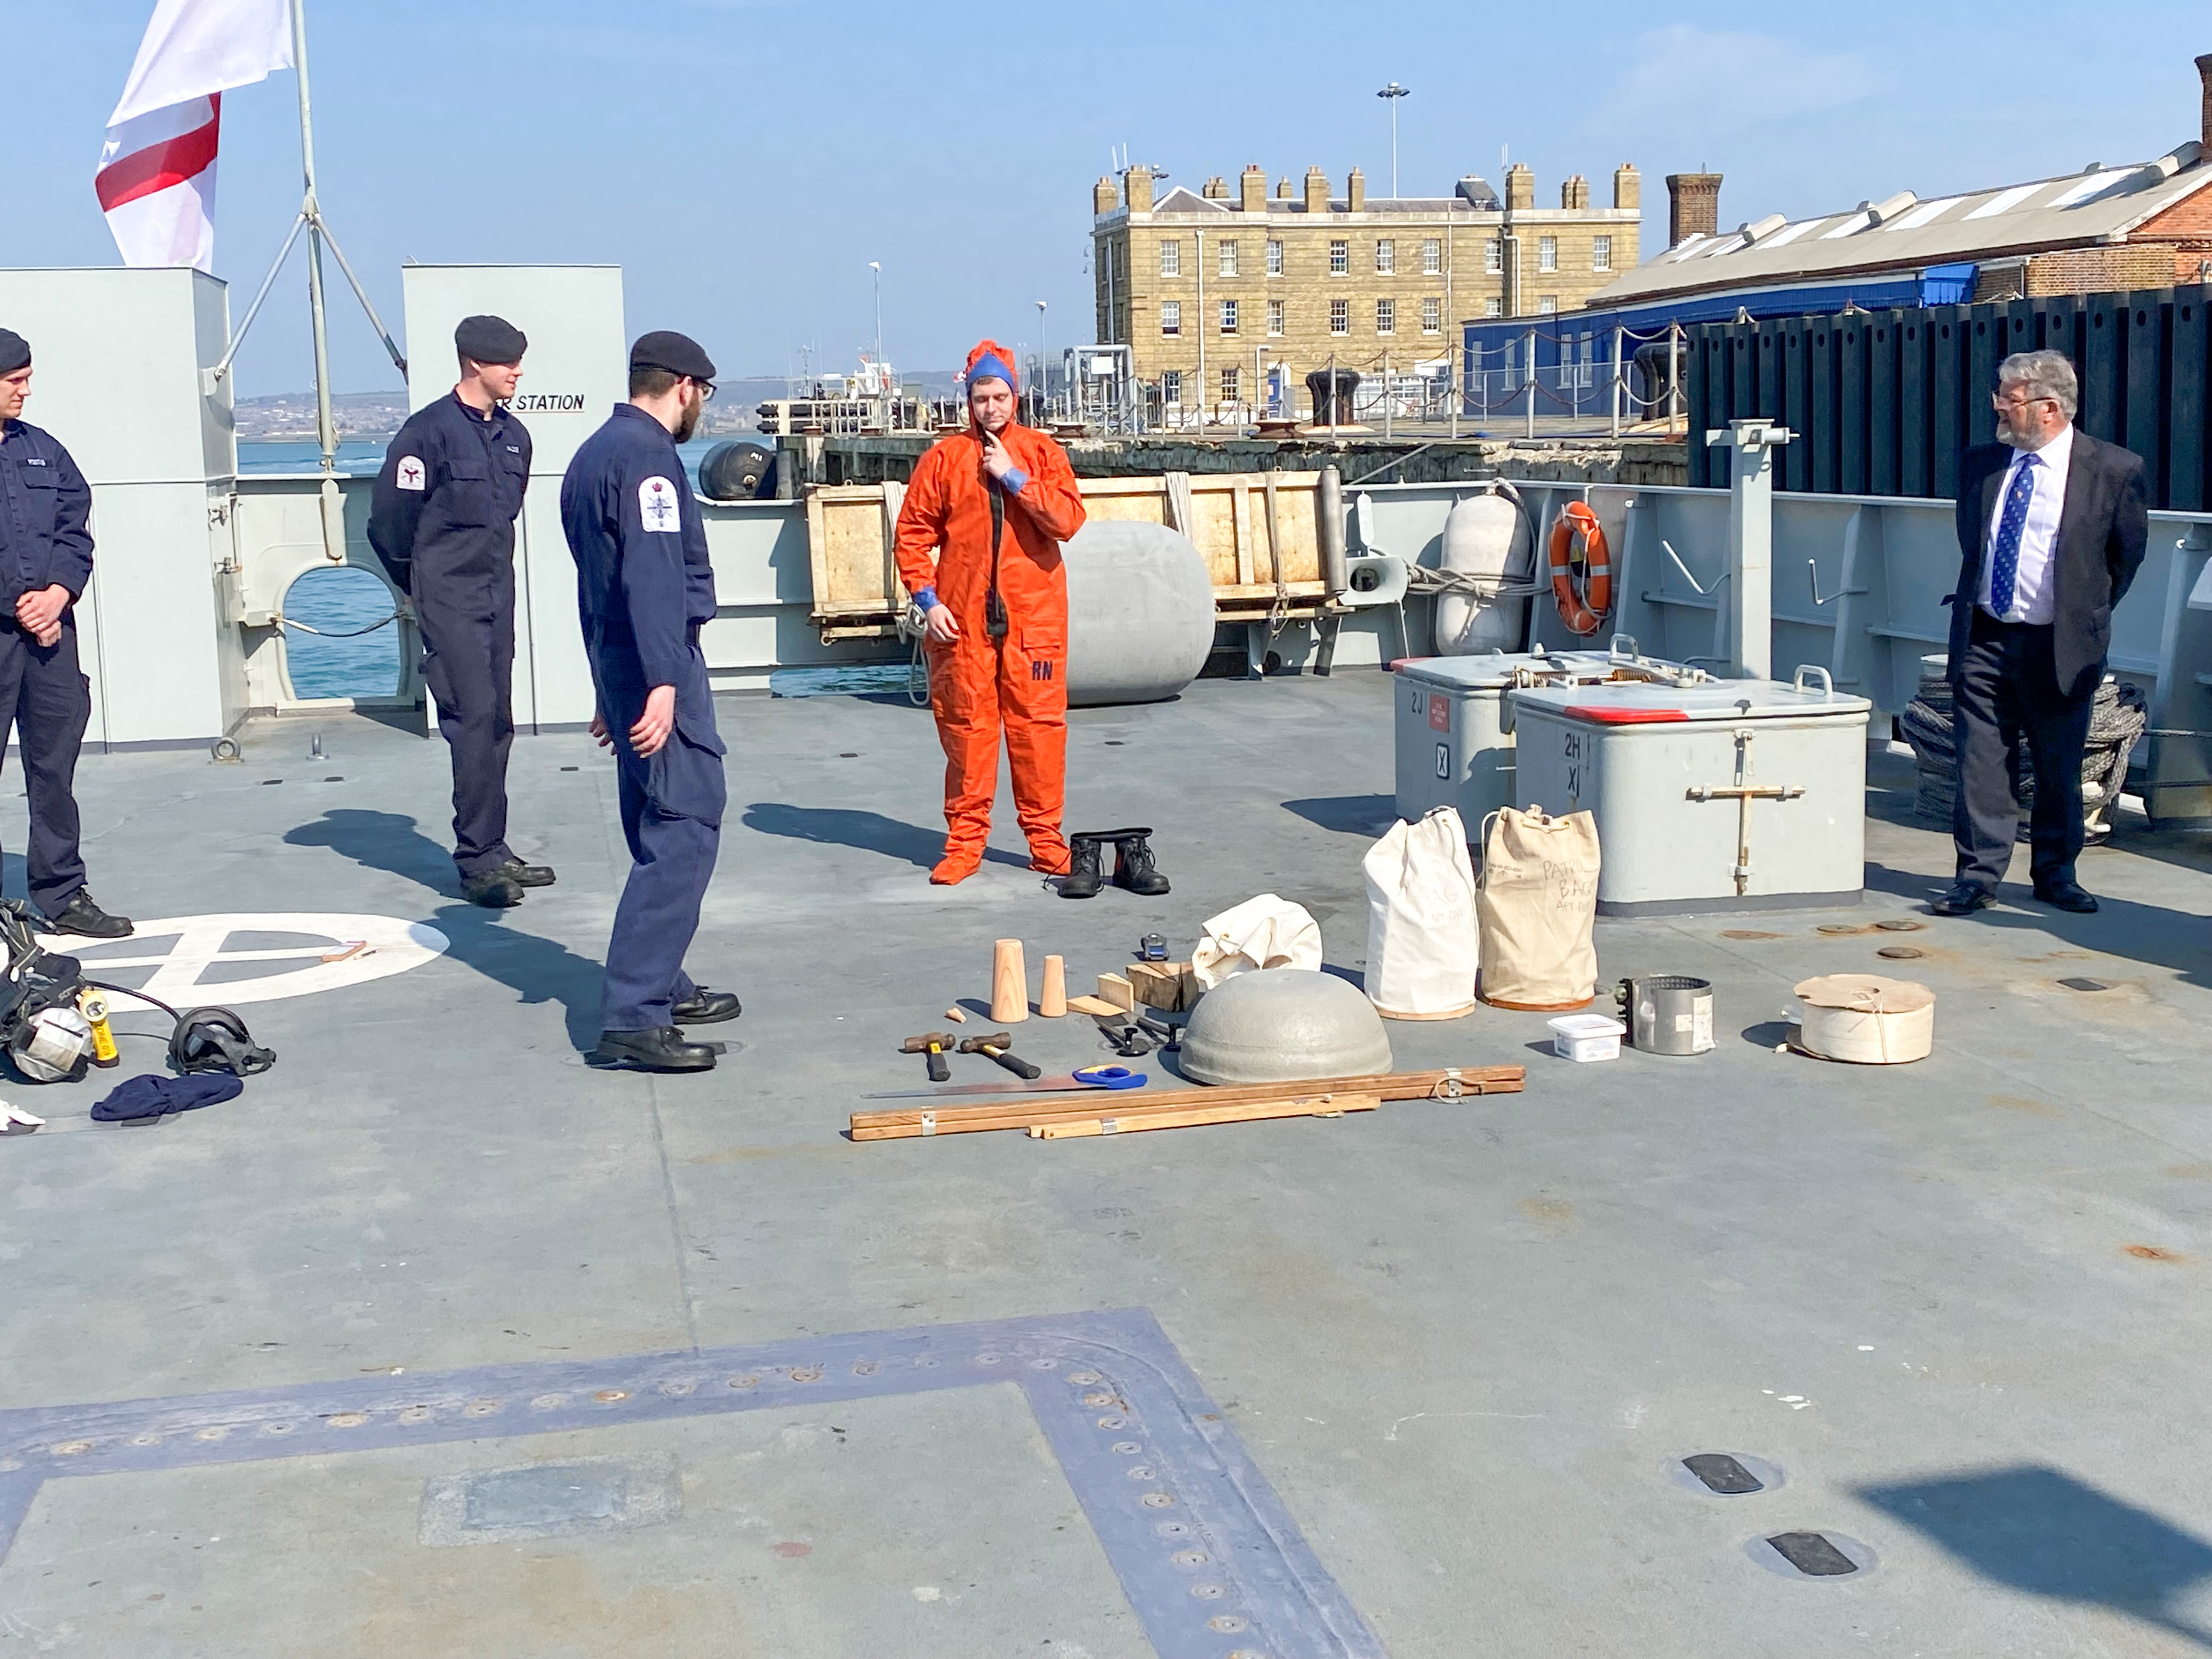 On the 25th March, Wing Commander James, Master Aircrew Taylor and Corporal Court, No. 622 Squadron RAF, visited HMS Mersey at Portsmouth.